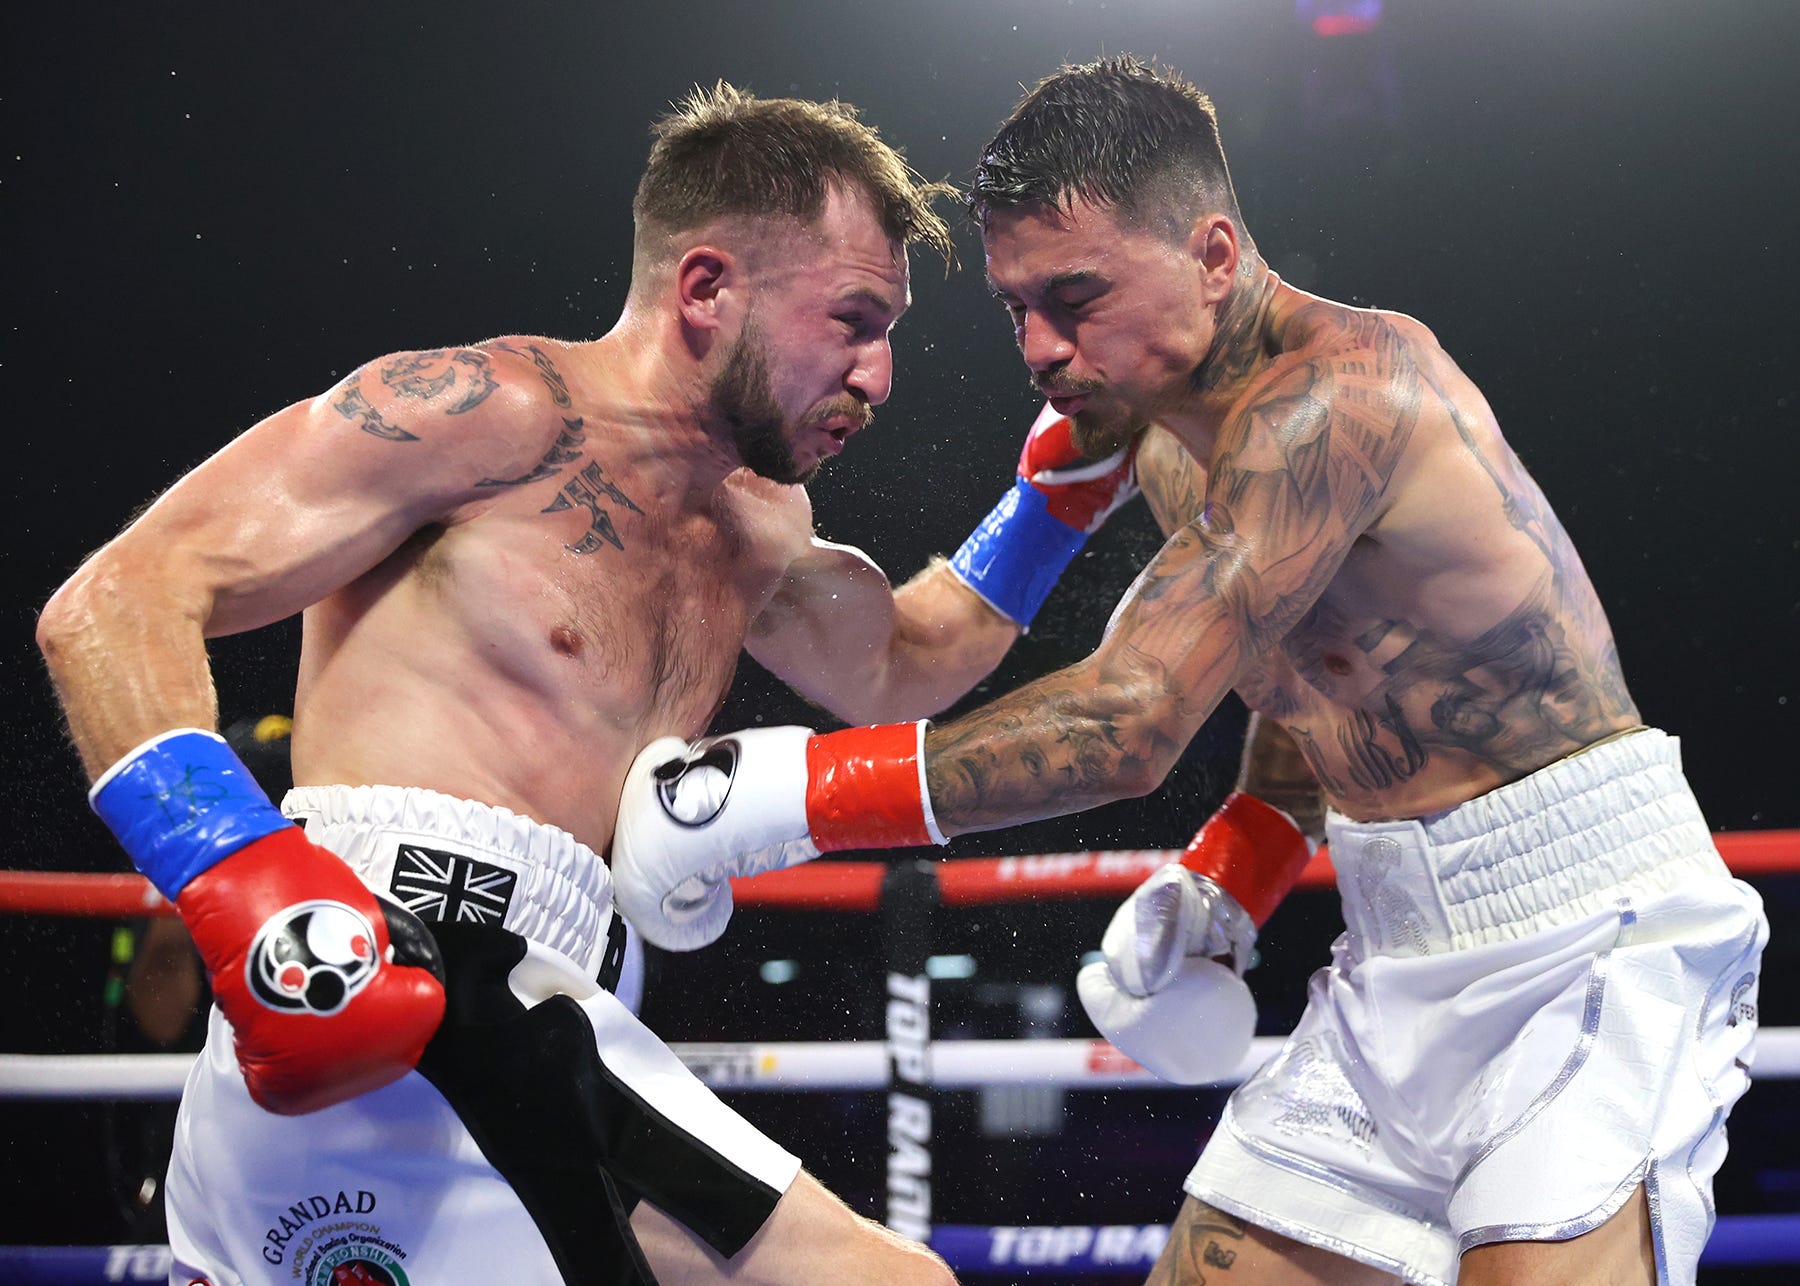 Kambosos wins controversial decision over Hughes in eliminator